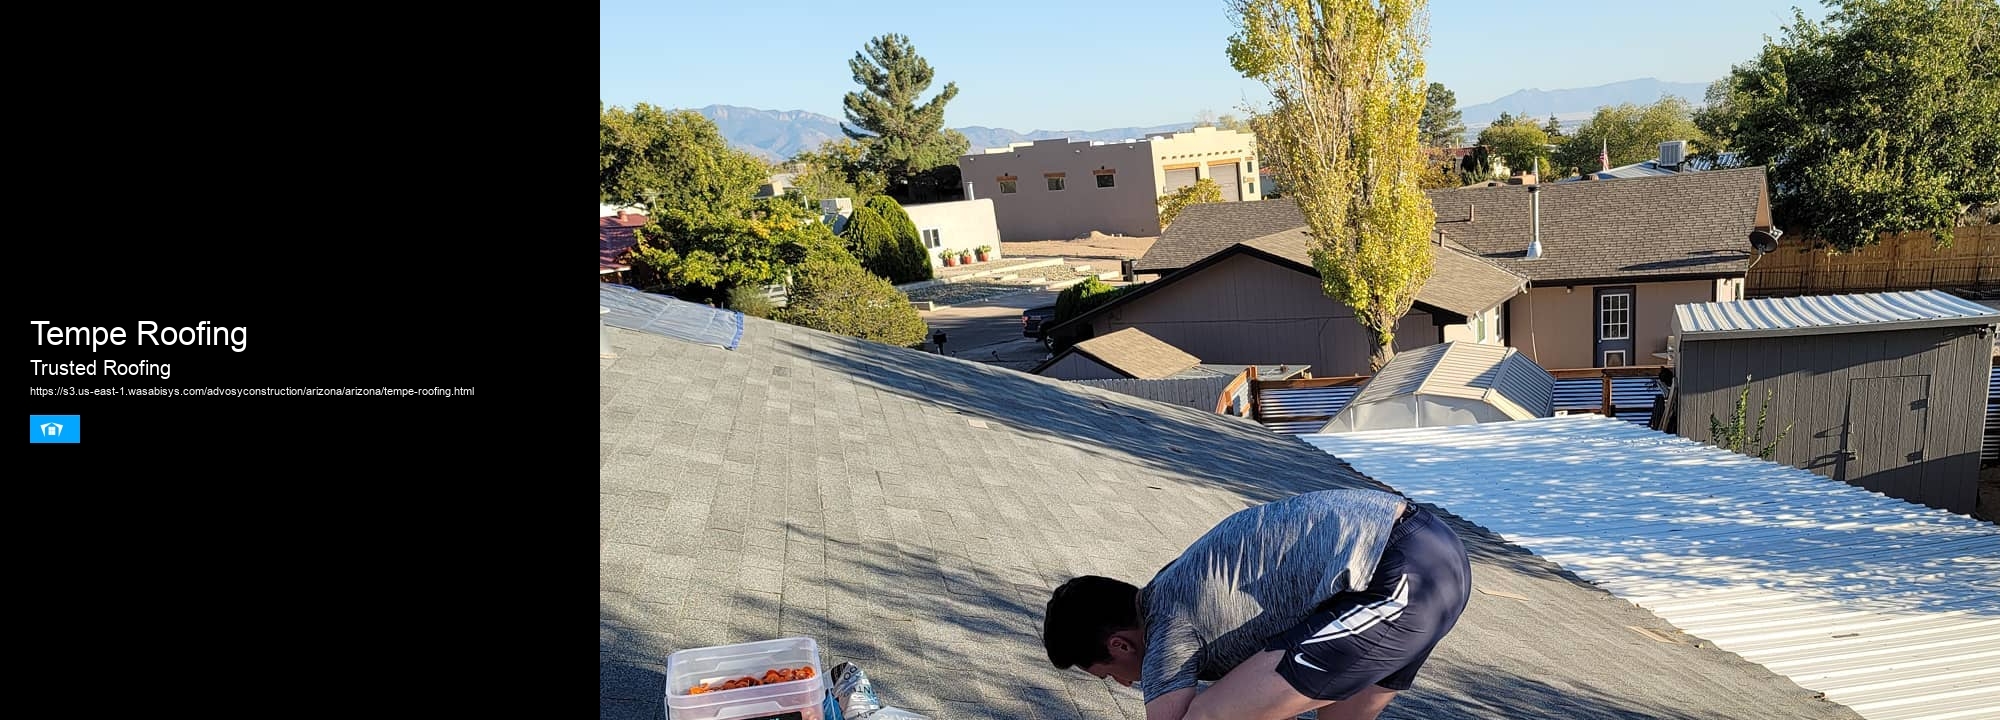 Tempe Roofing